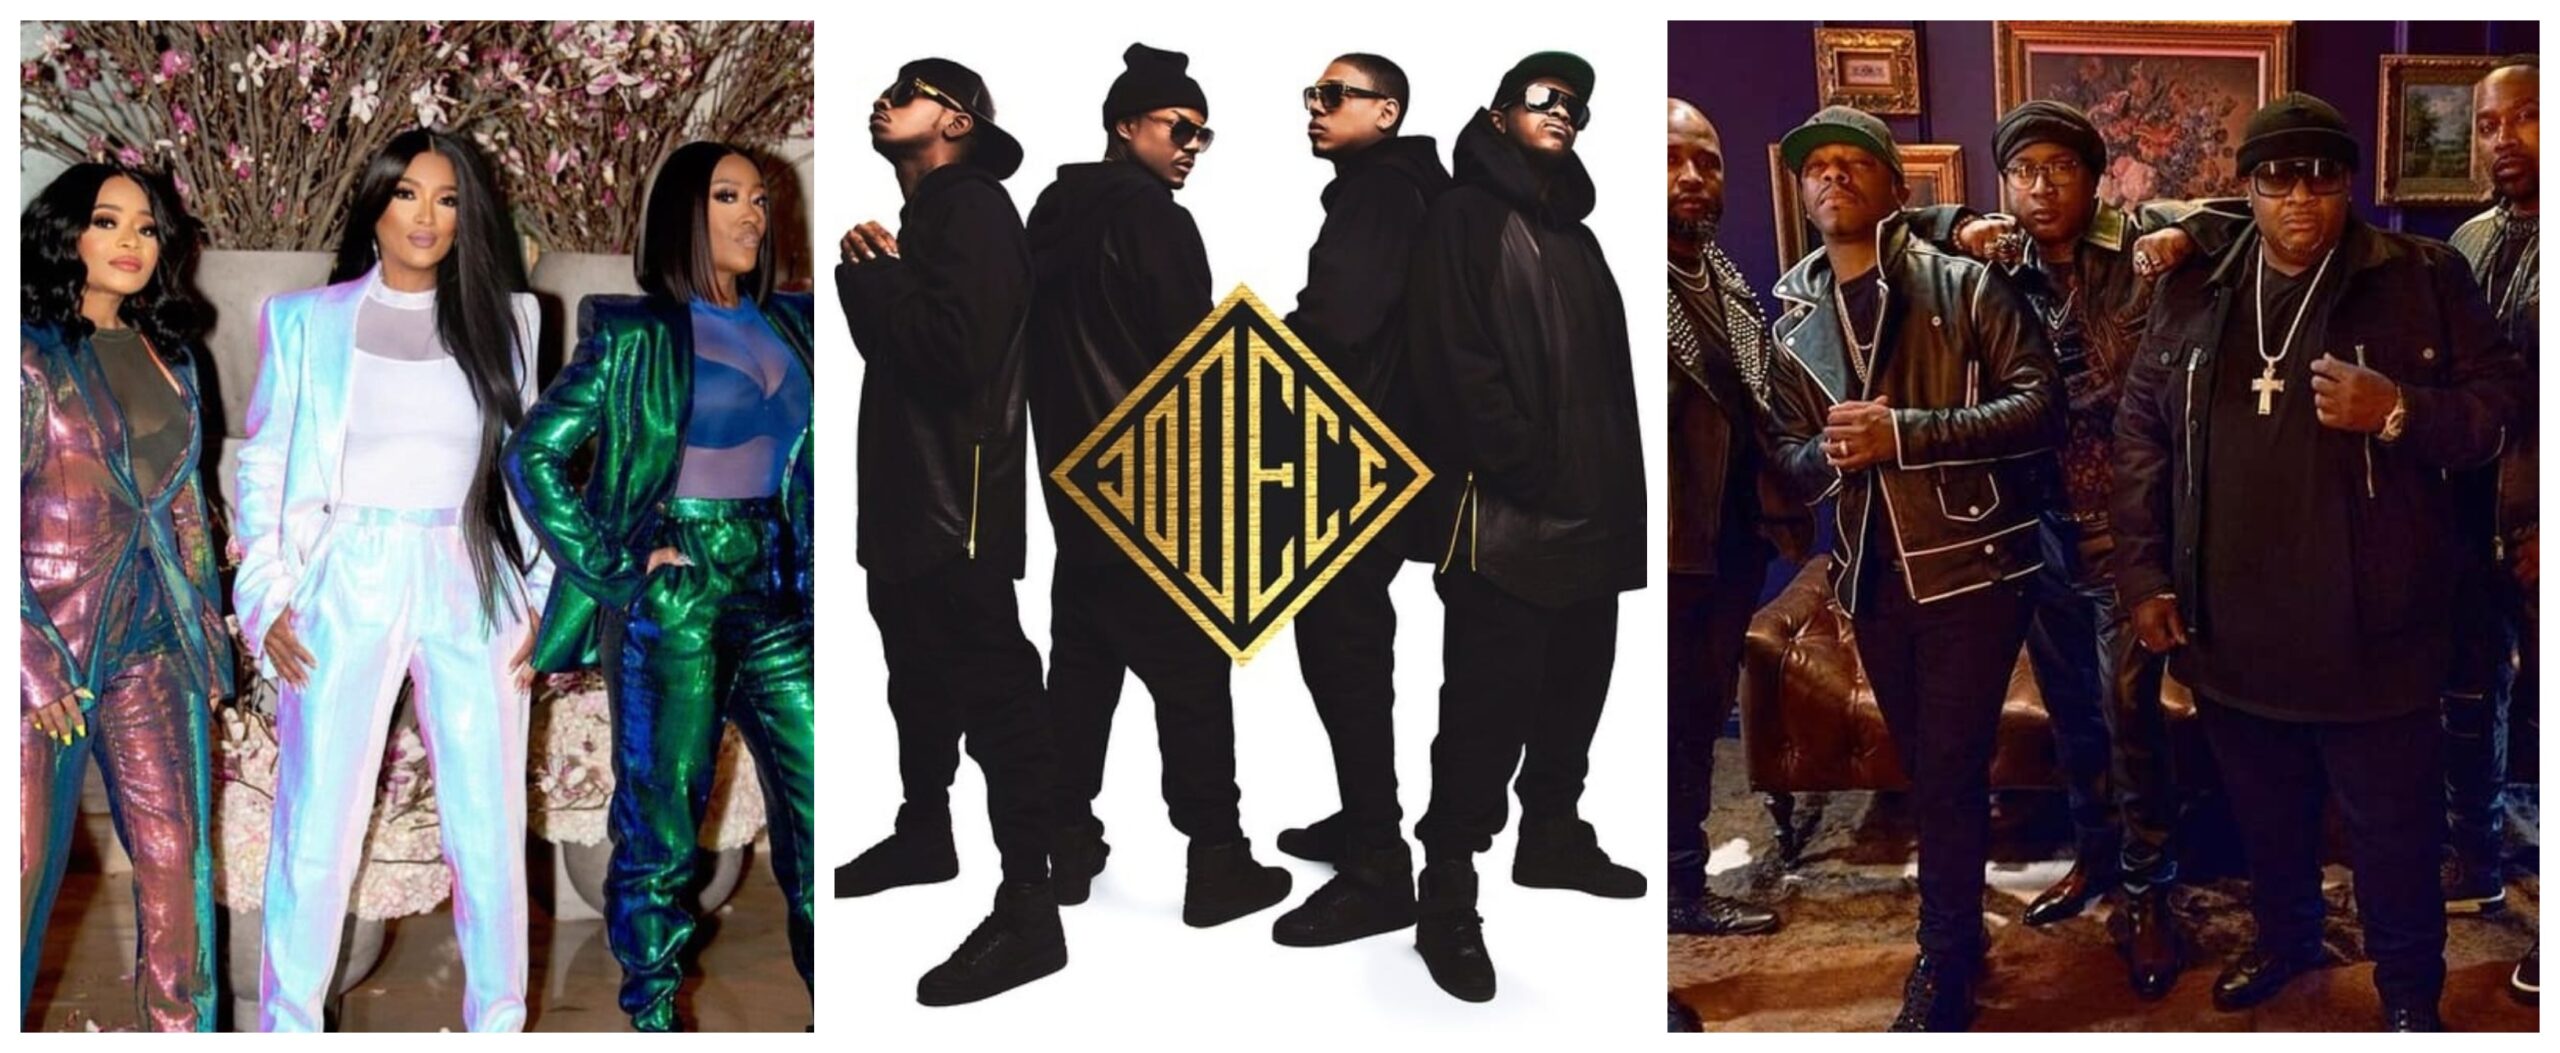 Jodeci Announces Summer Block Party Tour with SWV, Dru Hill, and More